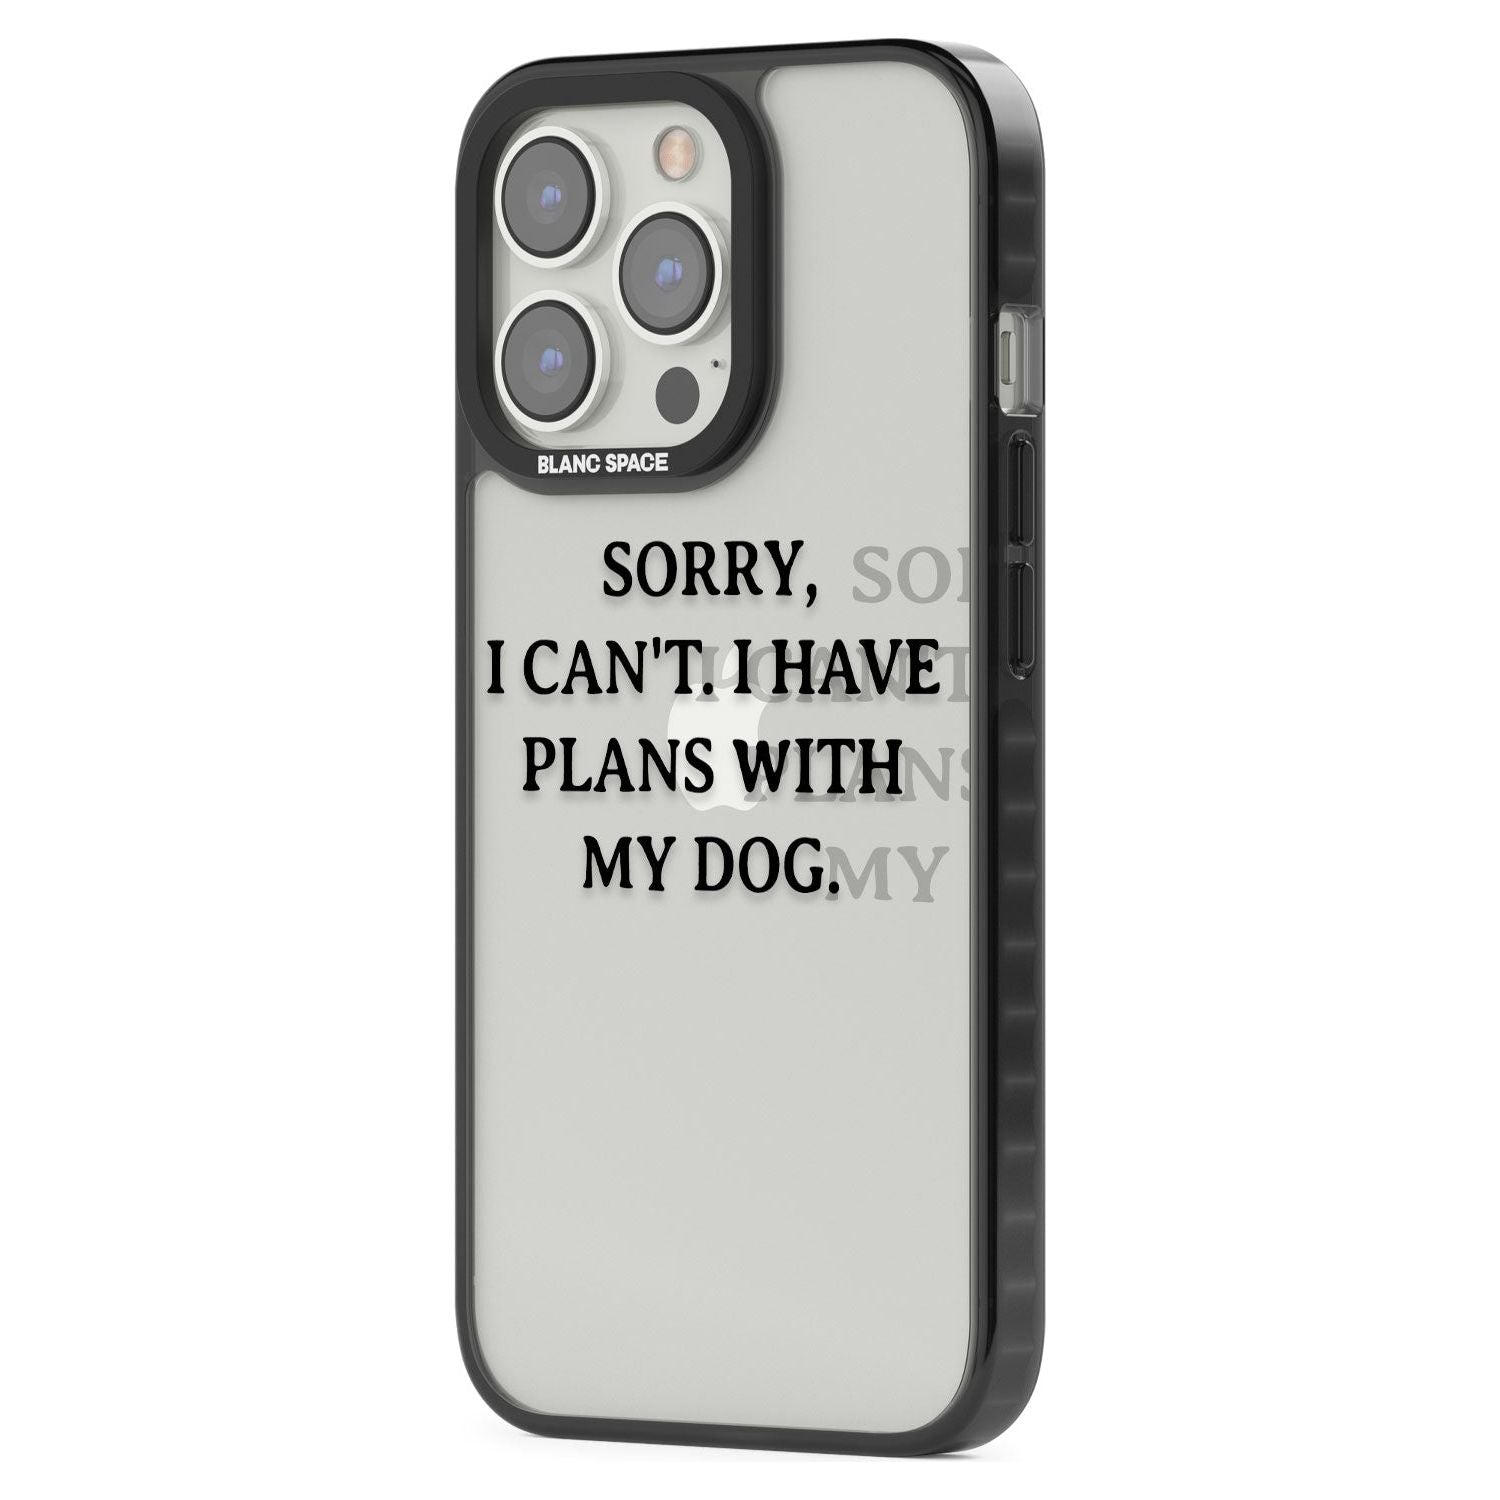 I Have Plans With My Dog Phone Case iPhone 15 Pro Max / Black Impact Case,iPhone 15 Plus / Black Impact Case,iPhone 15 Pro / Black Impact Case,iPhone 15 / Black Impact Case,iPhone 15 Pro Max / Impact Case,iPhone 15 Plus / Impact Case,iPhone 15 Pro / Impact Case,iPhone 15 / Impact Case,iPhone 15 Pro Max / Magsafe Black Impact Case,iPhone 15 Plus / Magsafe Black Impact Case,iPhone 15 Pro / Magsafe Black Impact Case,iPhone 15 / Magsafe Black Impact Case,iPhone 14 Pro Max / Black Impact Case,iPhone 14 Plus / Bl